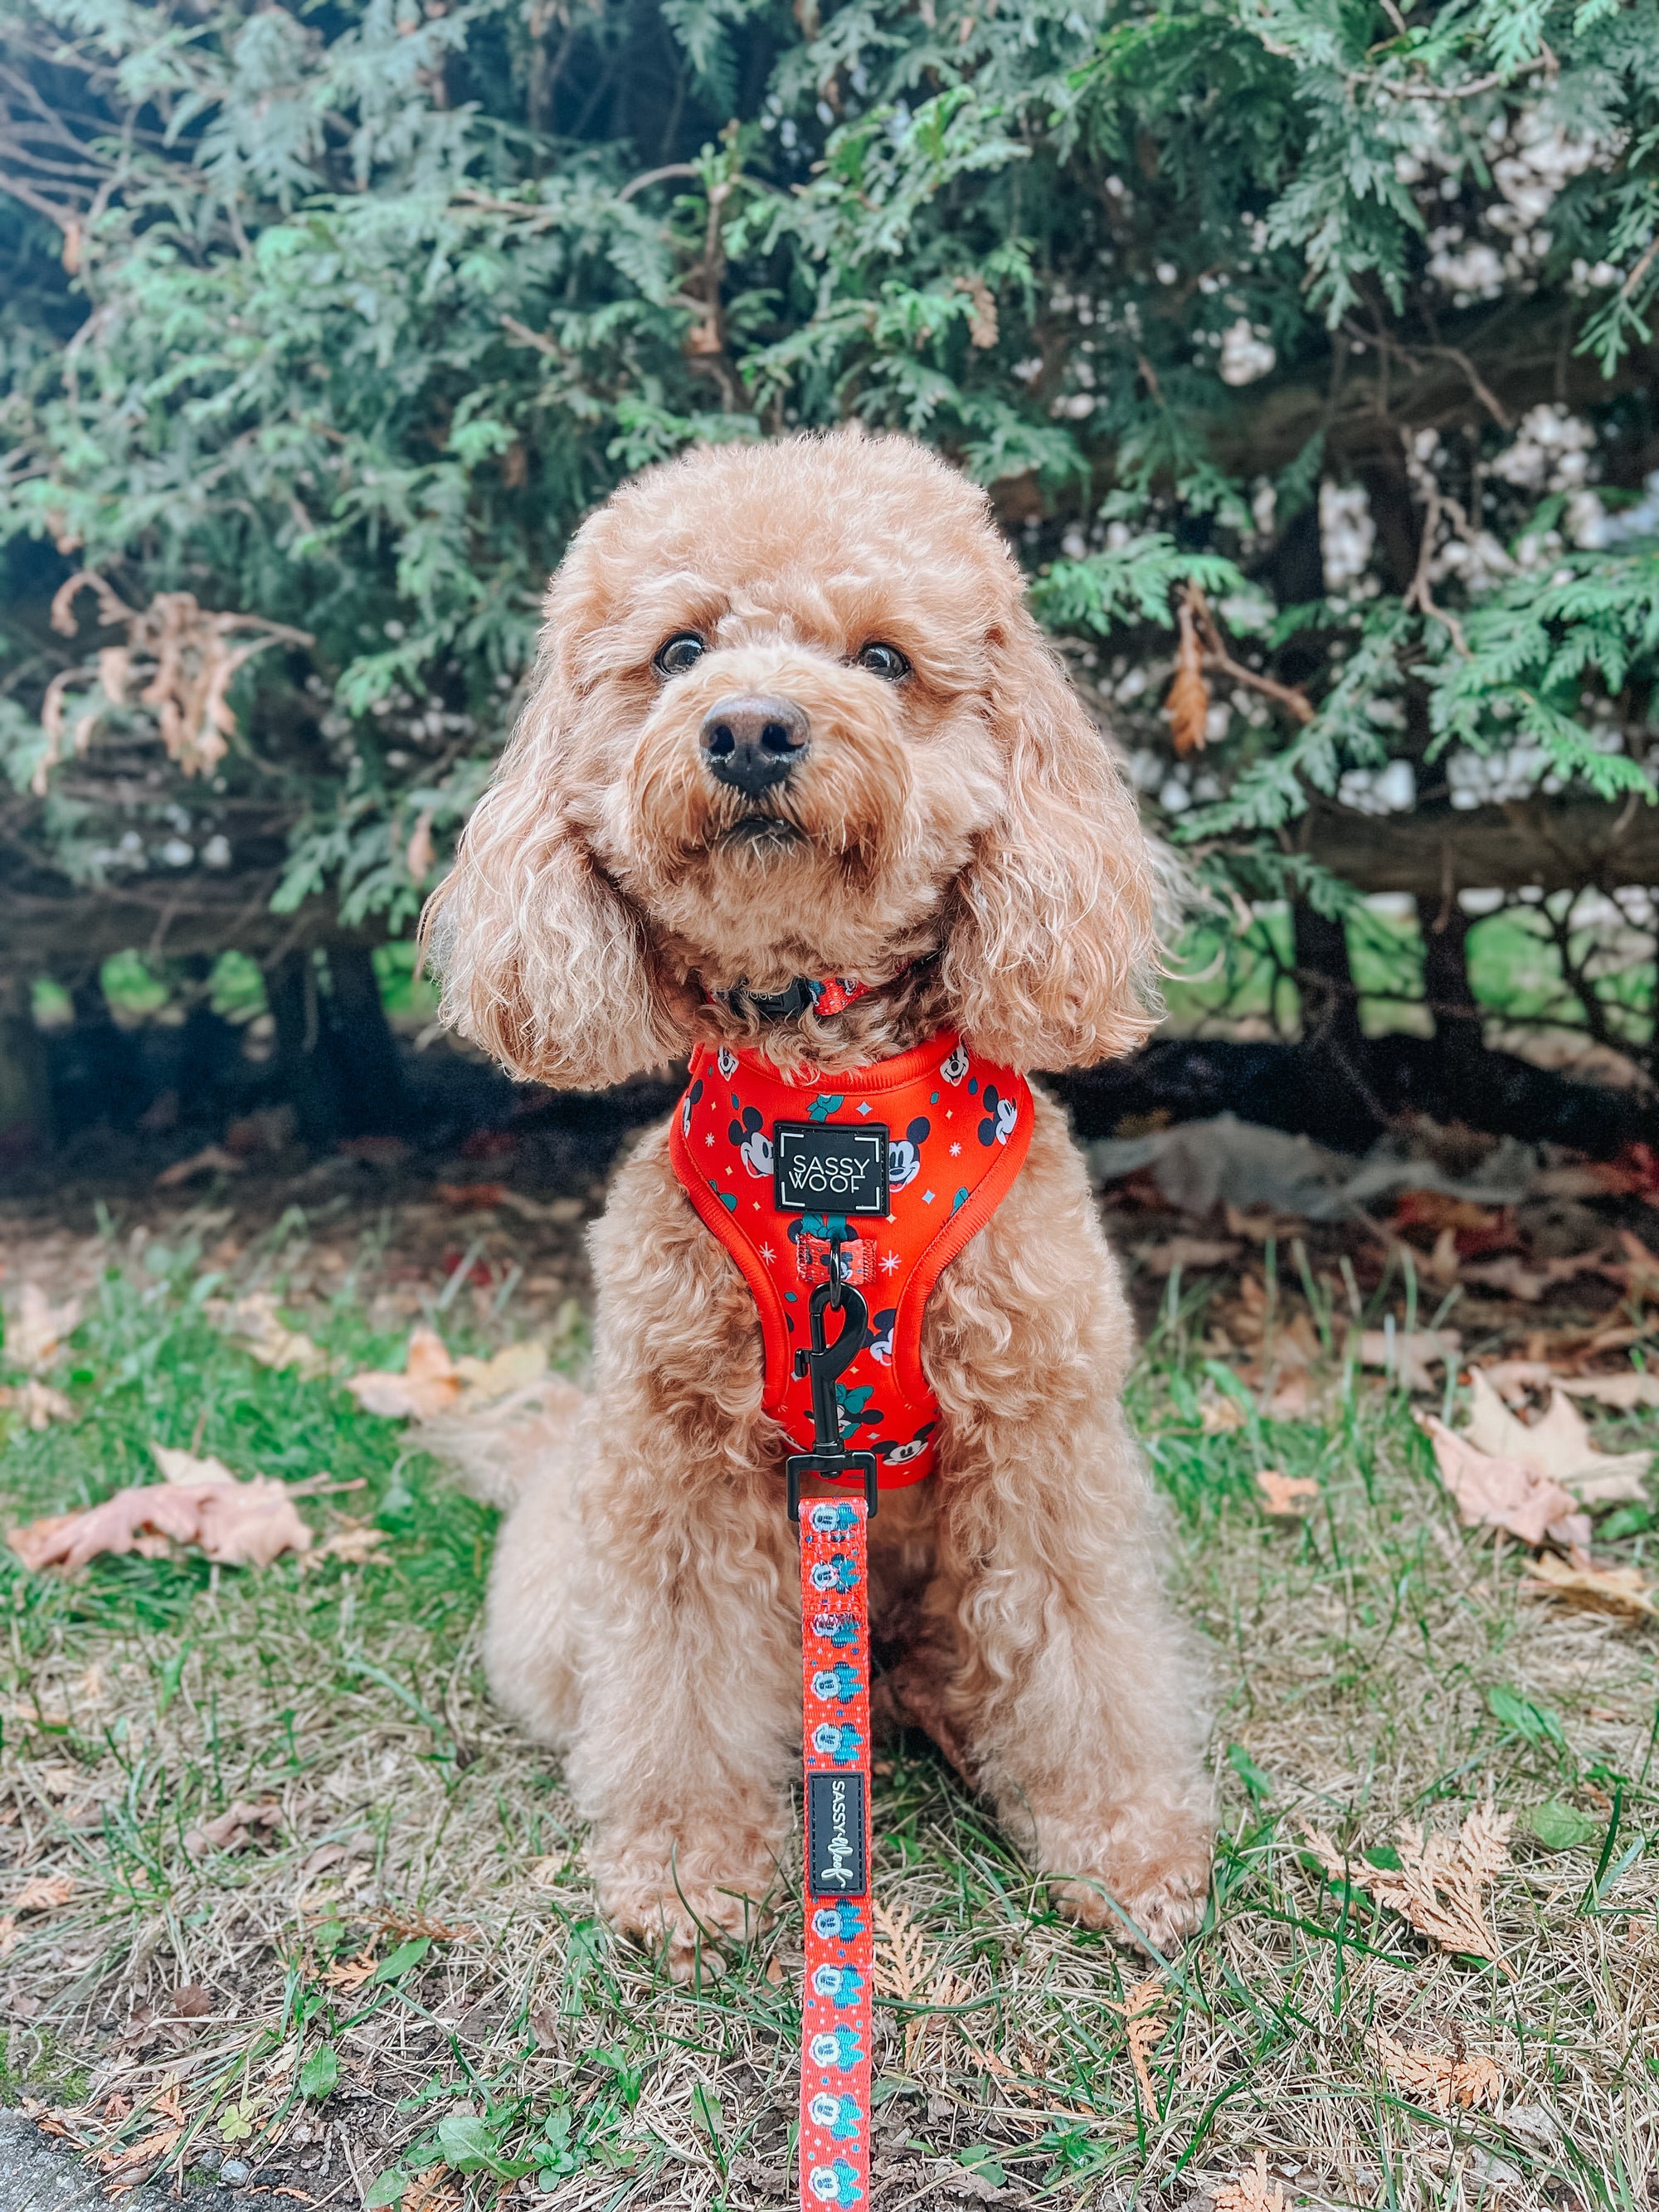 INFLUENCER_CONTENT | @GEORGIE_THECAVAPOO | SIZE XS